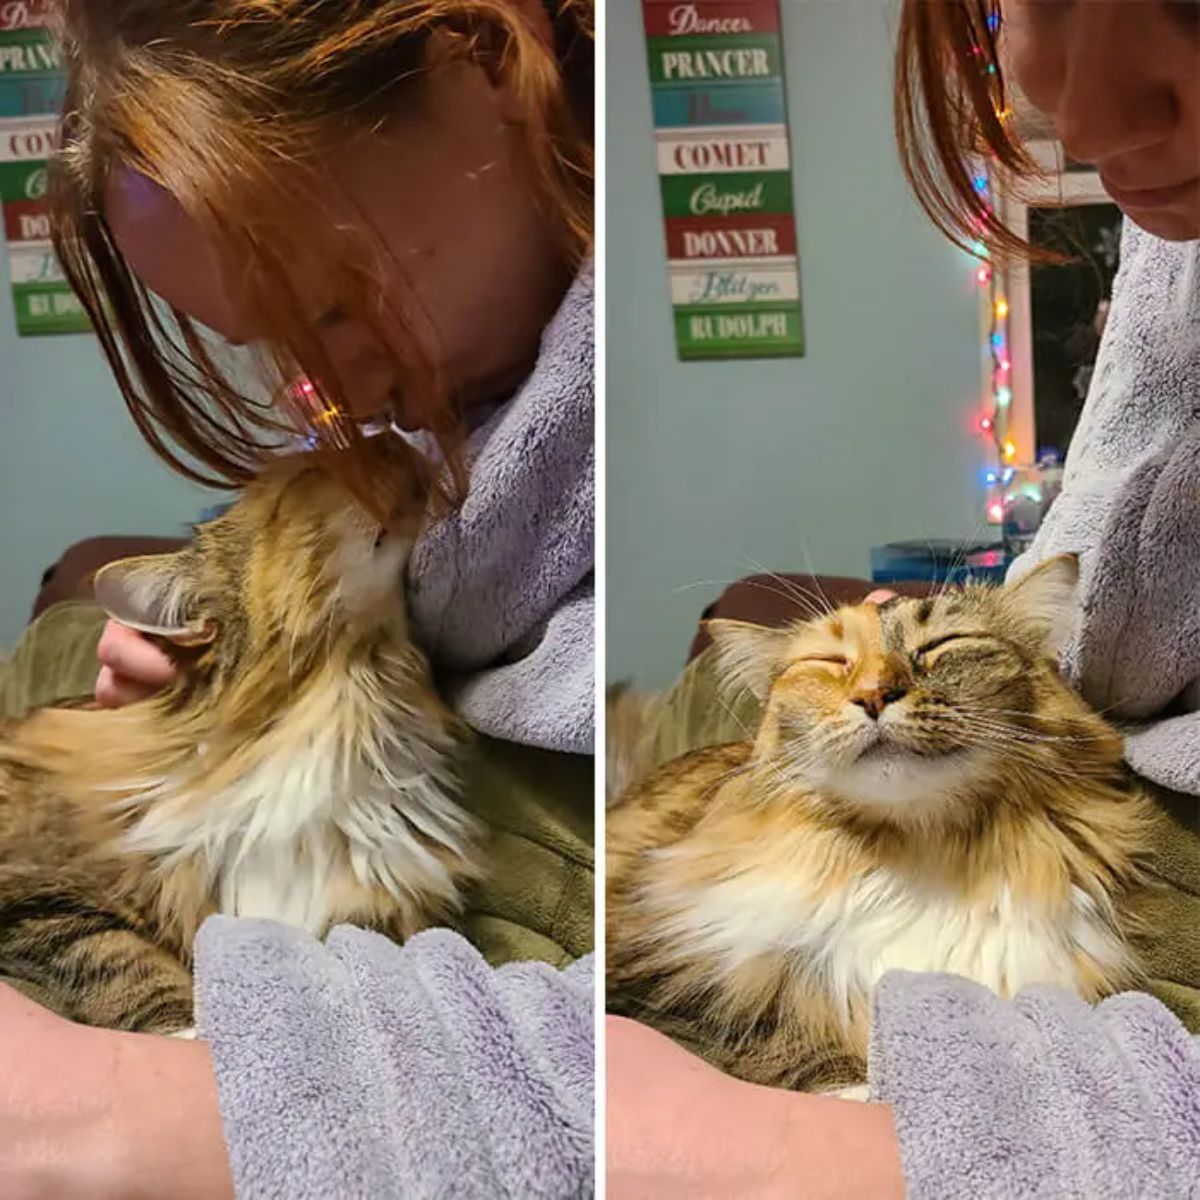 2 photos of a brown and white tabby cat cuddling with a woman